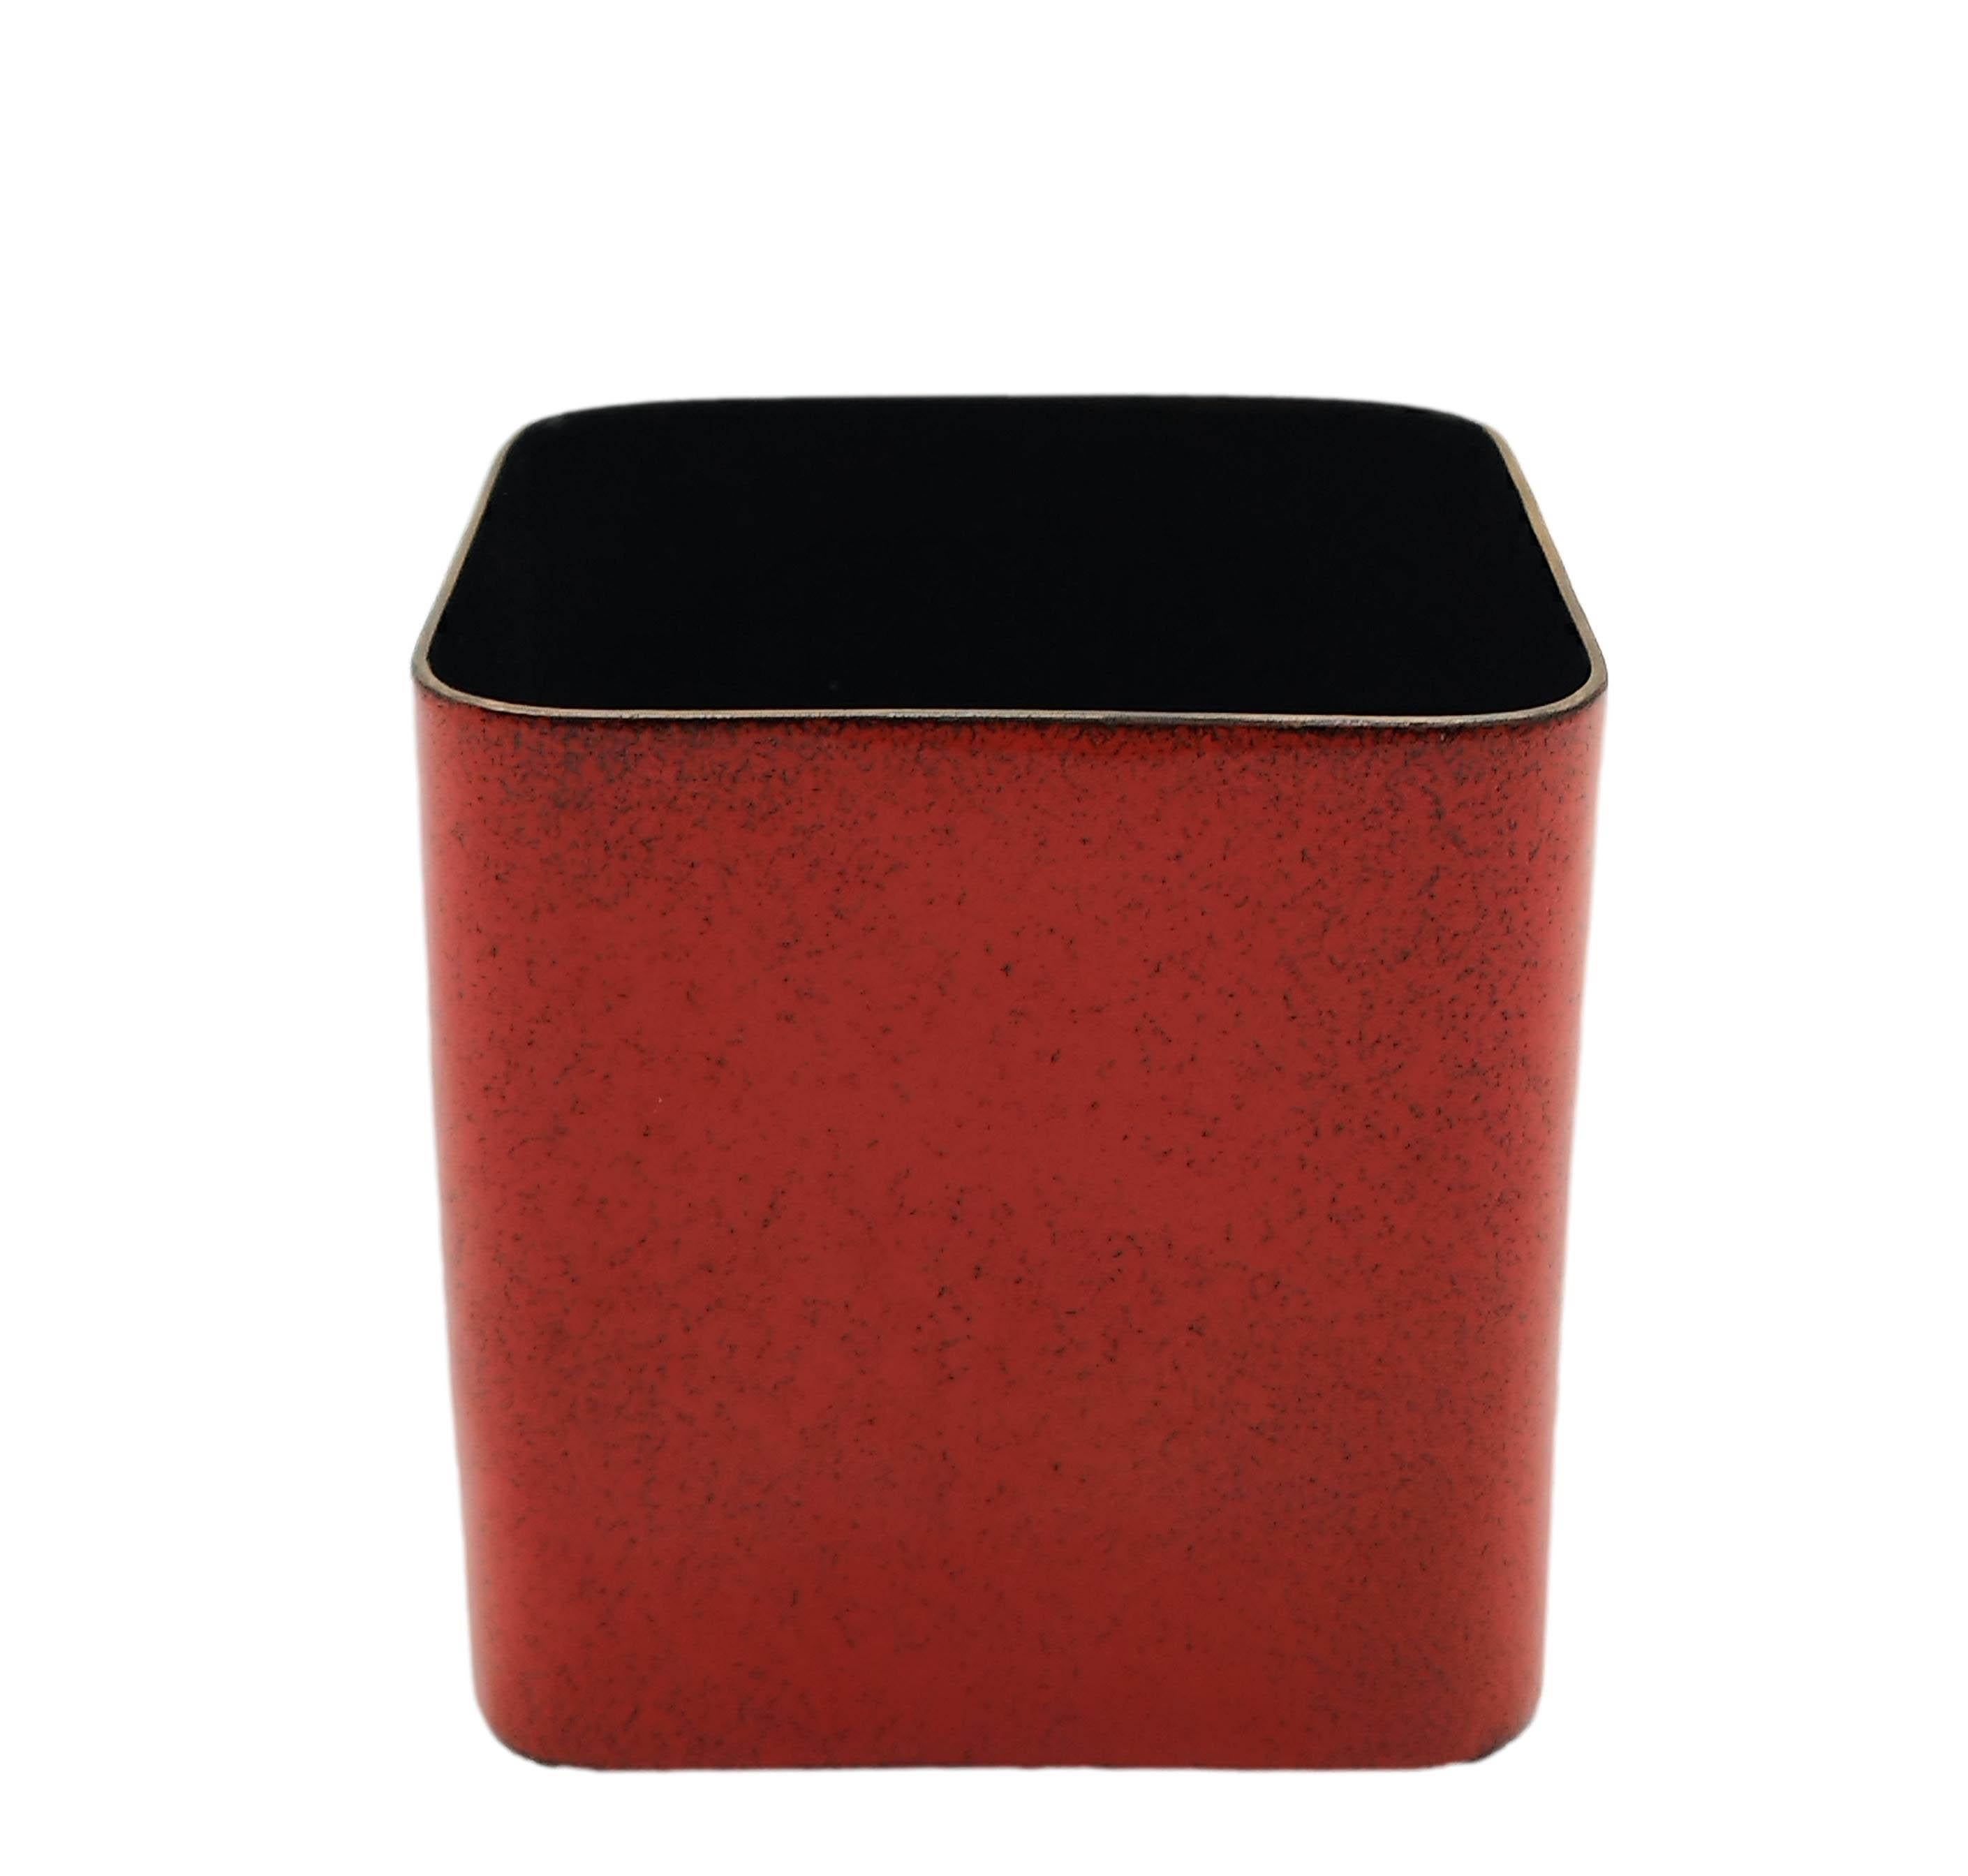 Square base vase in orange enameled copper, for Smalti De Poli Padova 1950s. Signature present under the base. De Poli is known as the Italian enamel master and collaborated with Gio Ponti and other Italian contemporaries to design the best enameled